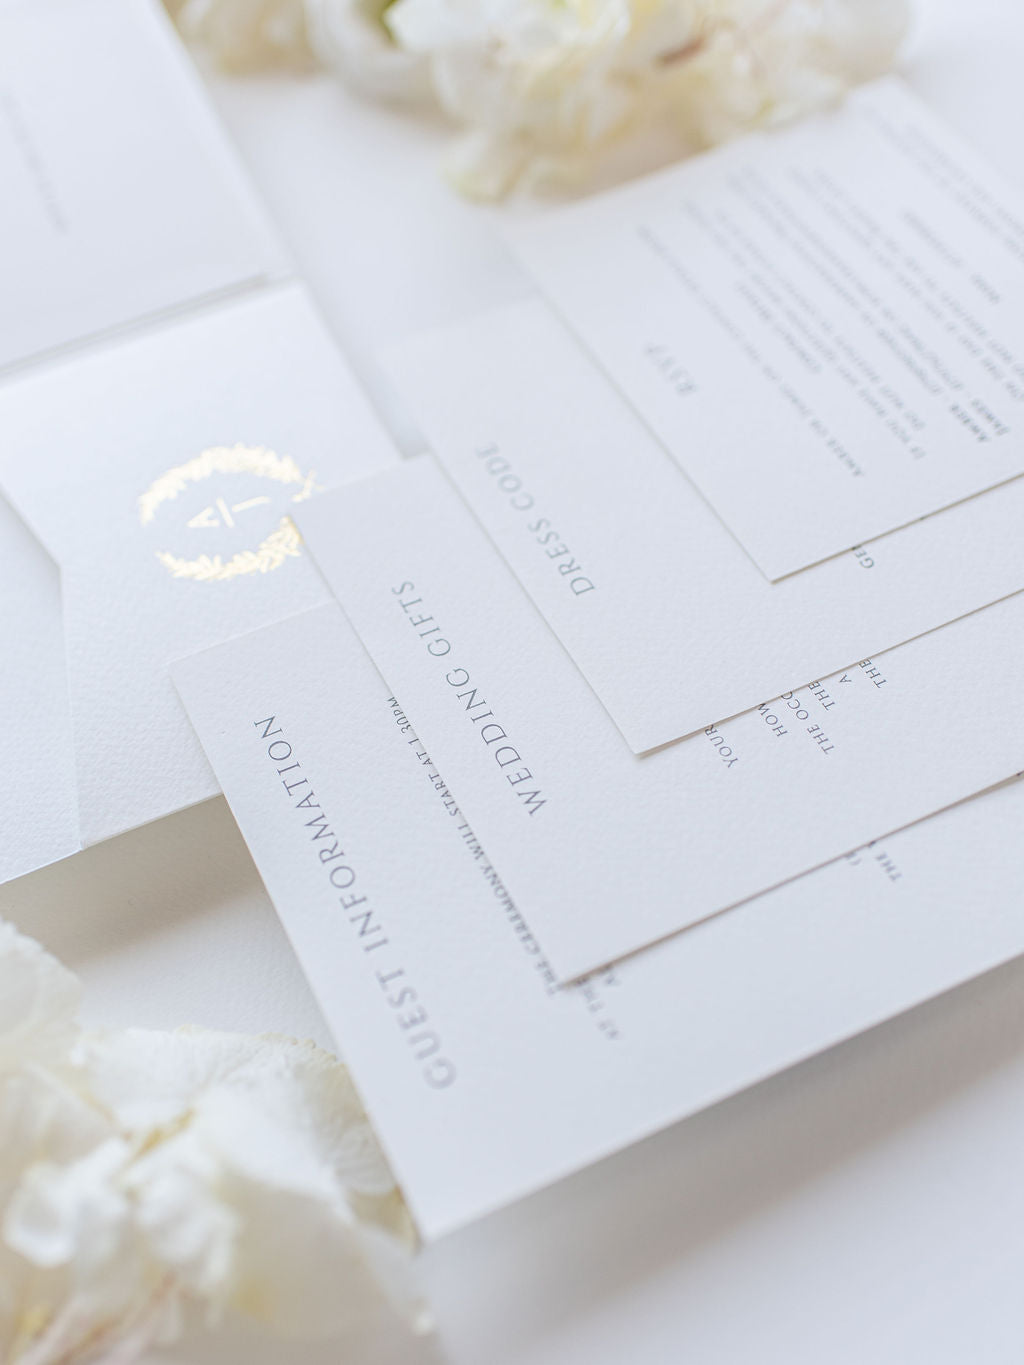 Wedding Invite Wordings Guide: RSVP, Compliments & Gifts (With Examples  From Real Wedding Cards!) - The Urban Life